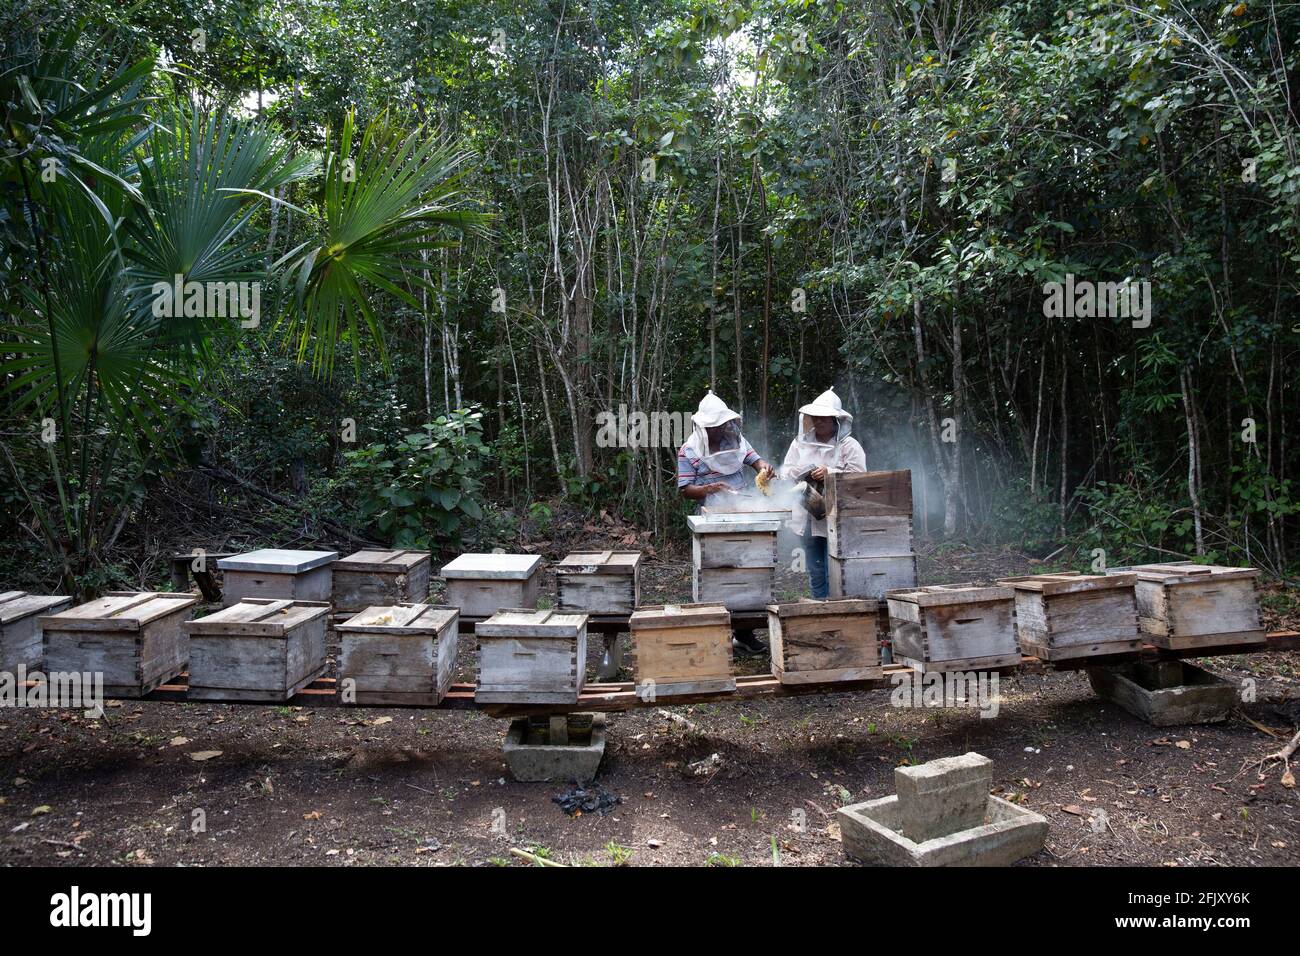 Jerónima López Hernández (R), 34, a bee-keeper, and her husband, Germán Bartolo Barrios (L), 52, attend to their hives deep in the forest outside the village of Nueva Vida in the UNESCO-protected Calakmul Biosphere Reserve (in Spanish Reserva de la Biósfera de Calakmul) in the Yucatán Peninsula, Calakmul Municipality, state of Campeche, Mexico on March 2, 2021. López Hernández says she is in the process of obtaining organic certification for her honey and fears the Maya Train project “will cause a lot of pollution, a lot”. The Maya Train project is one of Mexican President Andrés Manuel López Stock Photo